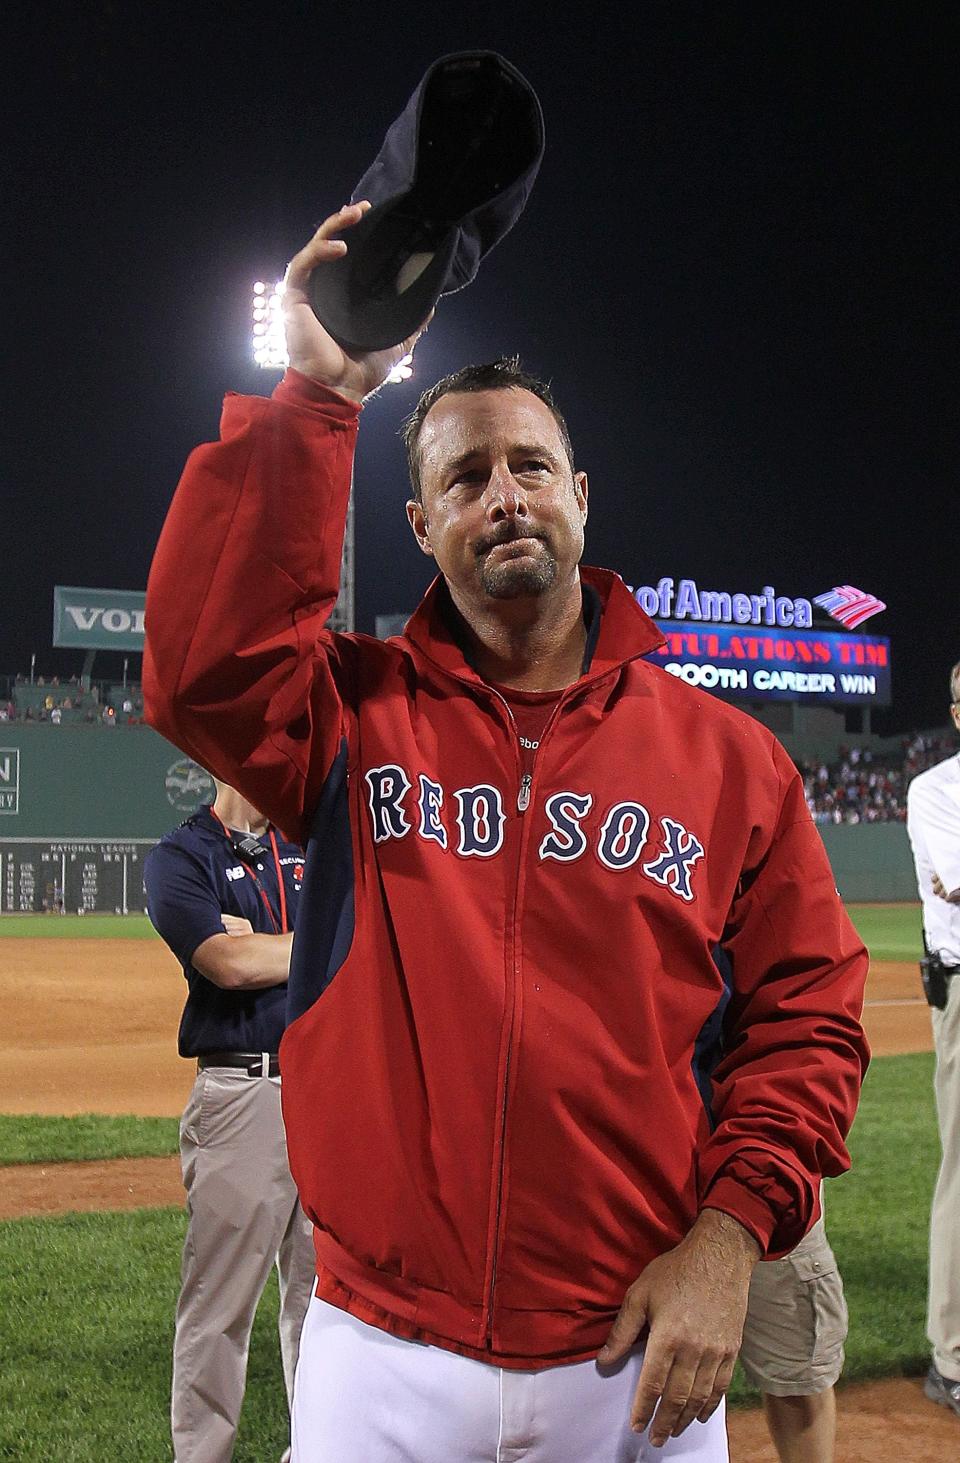 BOSTON, MA - SEPTEMBER 13:  Tim Wakefield #49 of the Boston Red Sox reacts after earning his 200th win after a game with the Toronto Blue Jays at Fenway Park on September 13, 2011 in Boston, Massachusetts. (Photo by Jim Rogash/Getty Images)